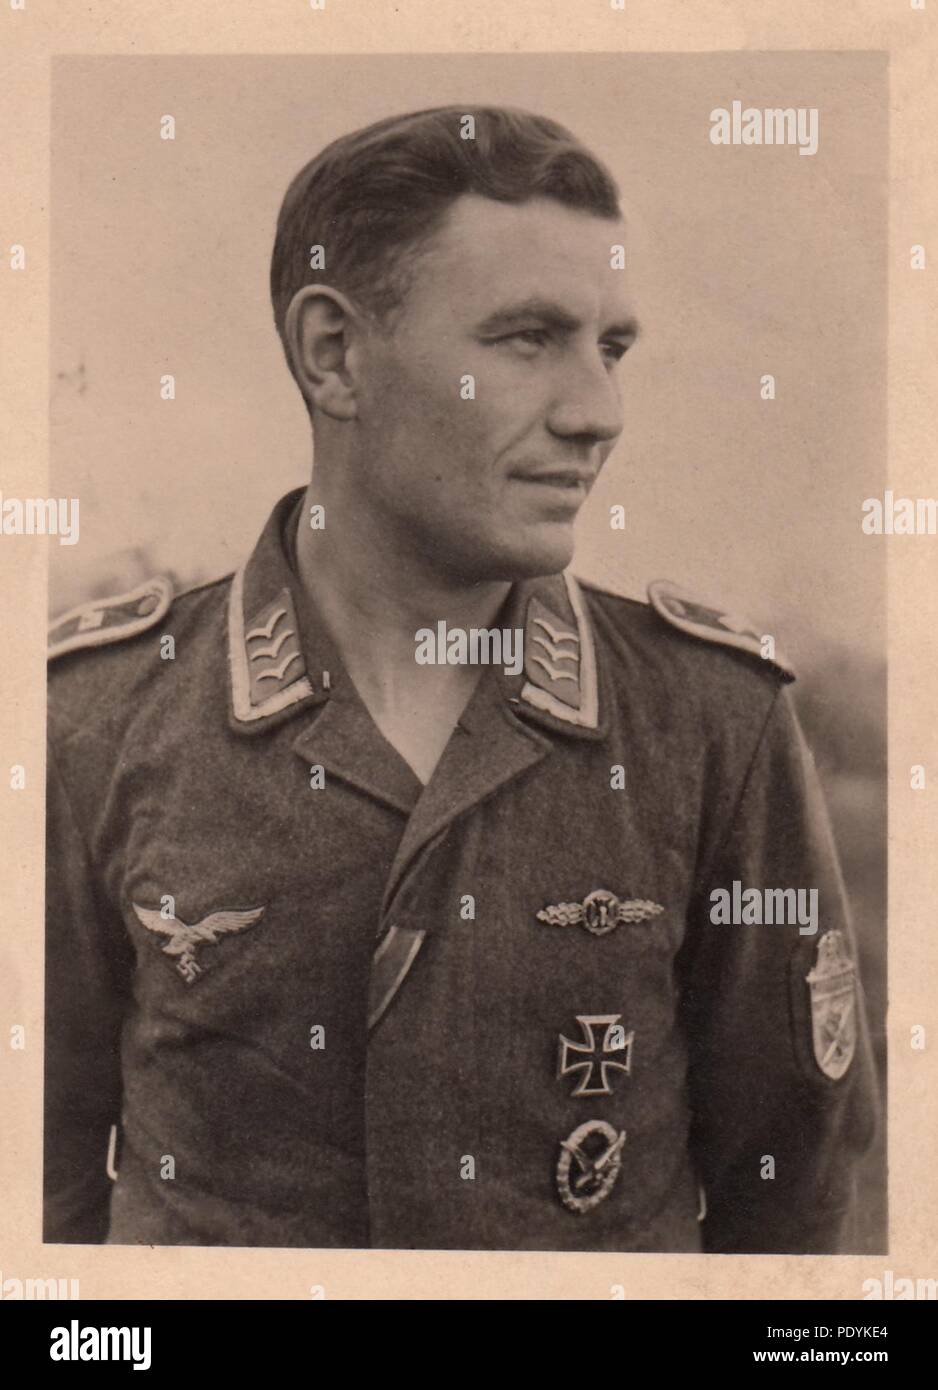 Image from the photo album of Feldwebel Willi Hoffmann of 5. Staffel, Kampfgeschwader 30: Willi Hoffmann pictured in 1942, wearing the rank insignia of a Feldwebel on his Fiegerbluse. He wears the Bomber Clasp in Gold, Narvik Shield (on his left sleeve), Iron Cross 1st Class and Air Gunner Award Badge. The Iron Cross 2nd Class ribbon is sewn to the first buttonhole of the Fliegerbluse. Willi Hoffmann and his crew failed to return from a mission in the Mediterranean on 23rd January 1943. Stock Photo